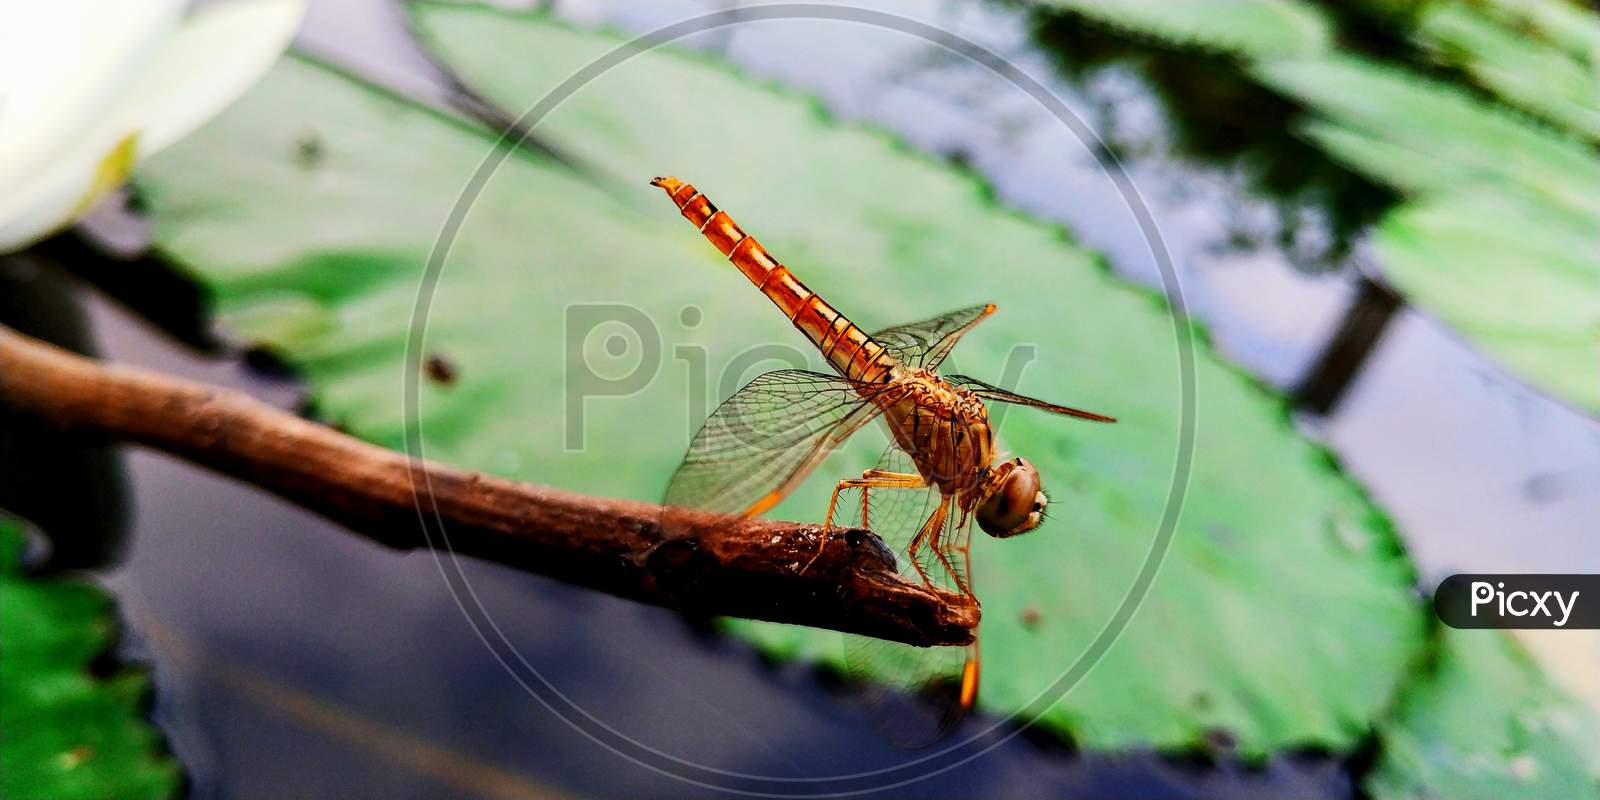 Golden Colour Dragon Fly On a Plant